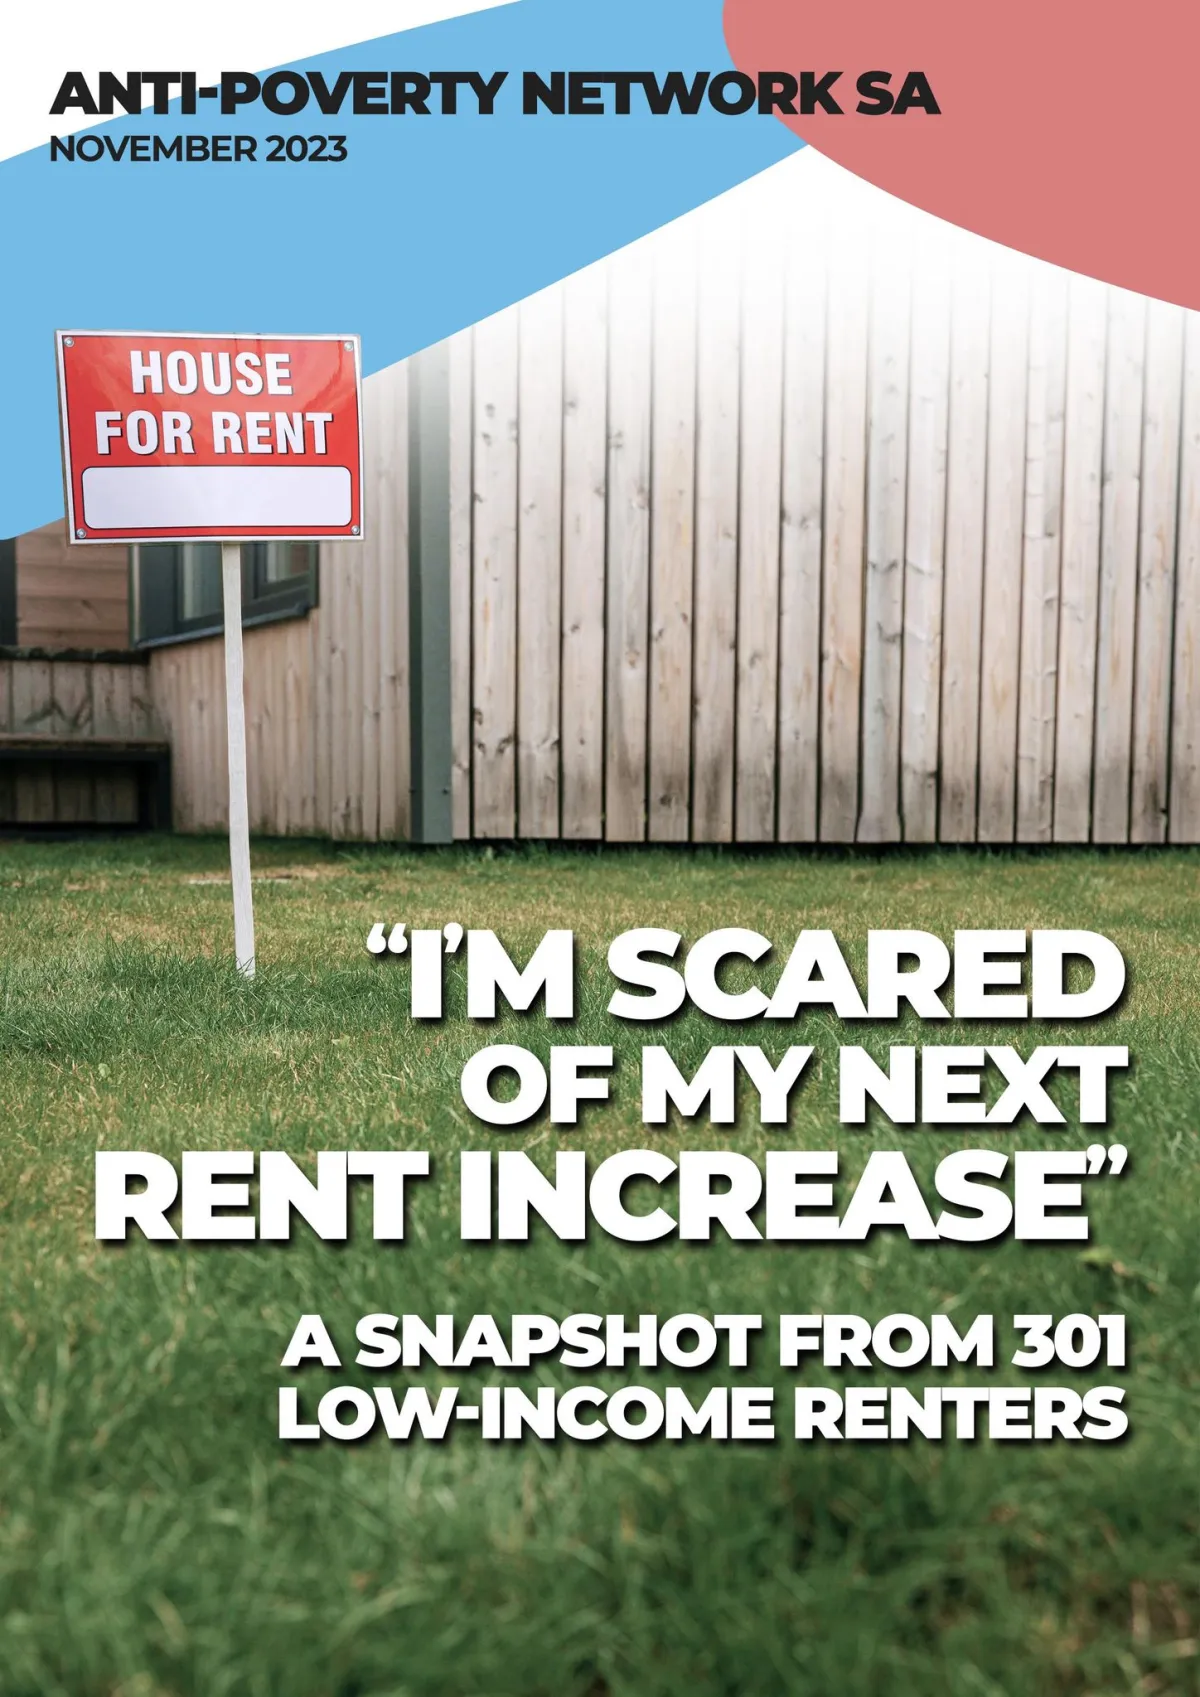 ‘I’m Scared Of My Next Rent Increase’: Survey Of 301 Renters Highlights Ongoing Emergency